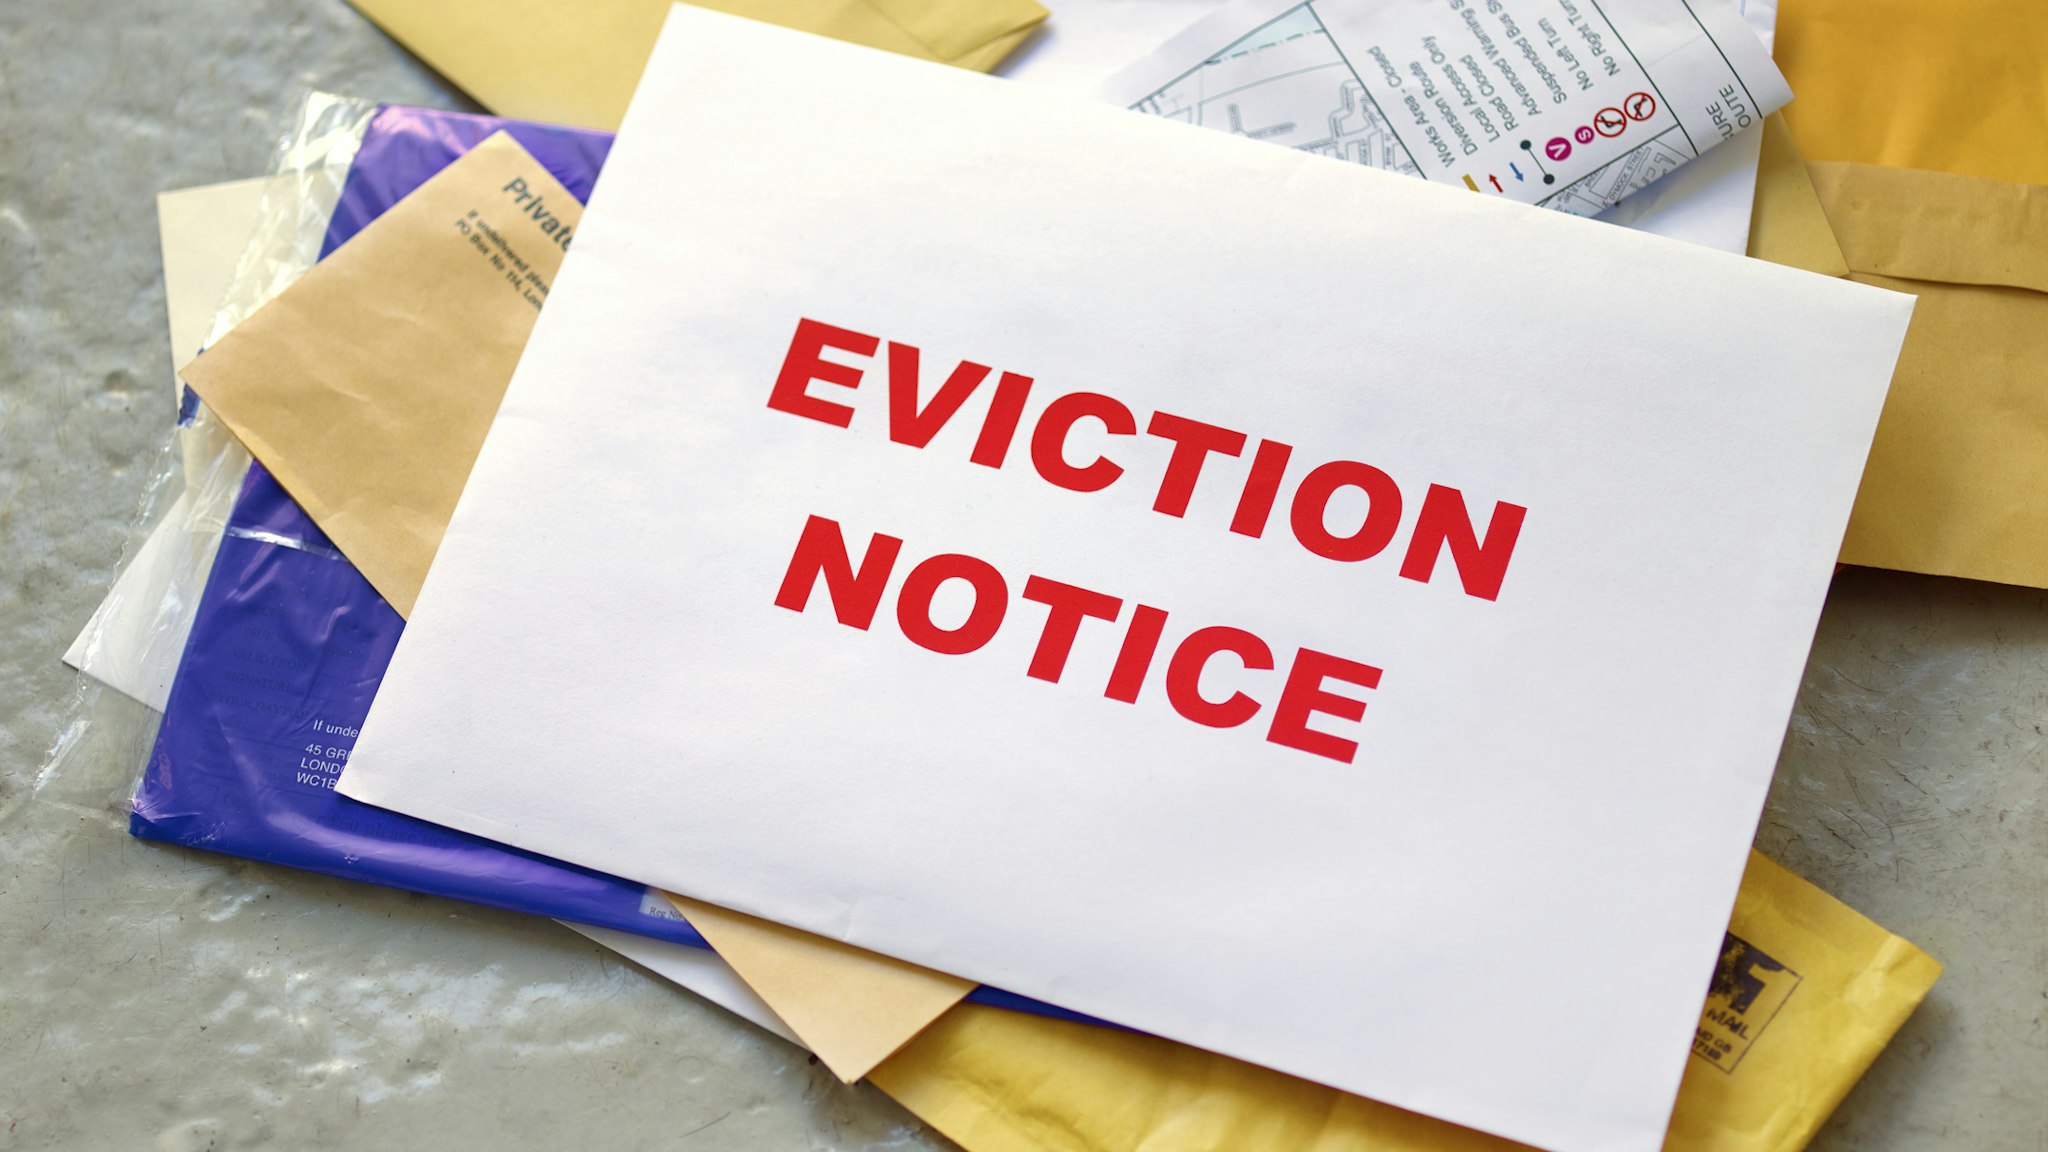 Eviction notice in the post - stock photo